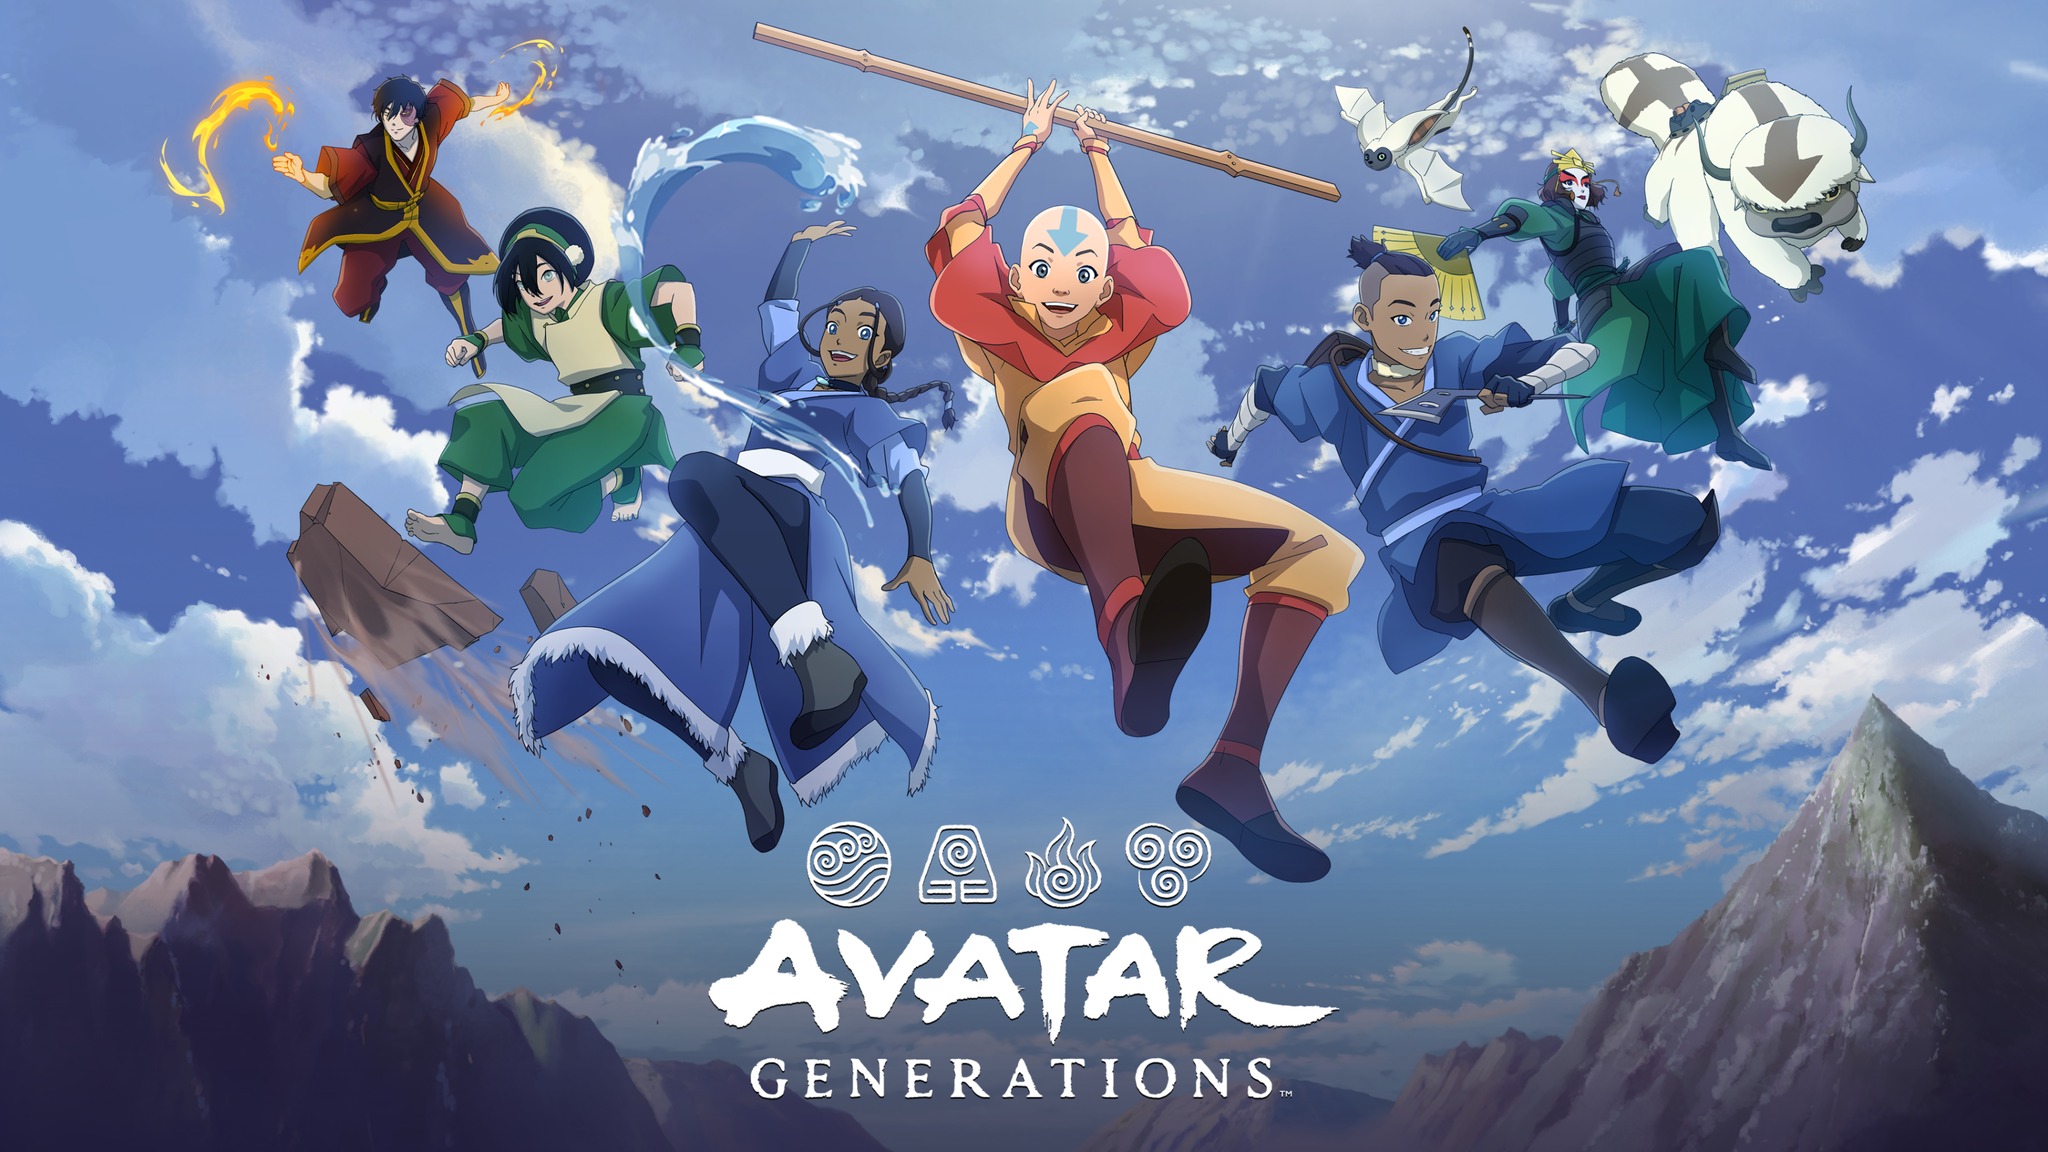 Avatar Generations is now open for pre-registration with rewards